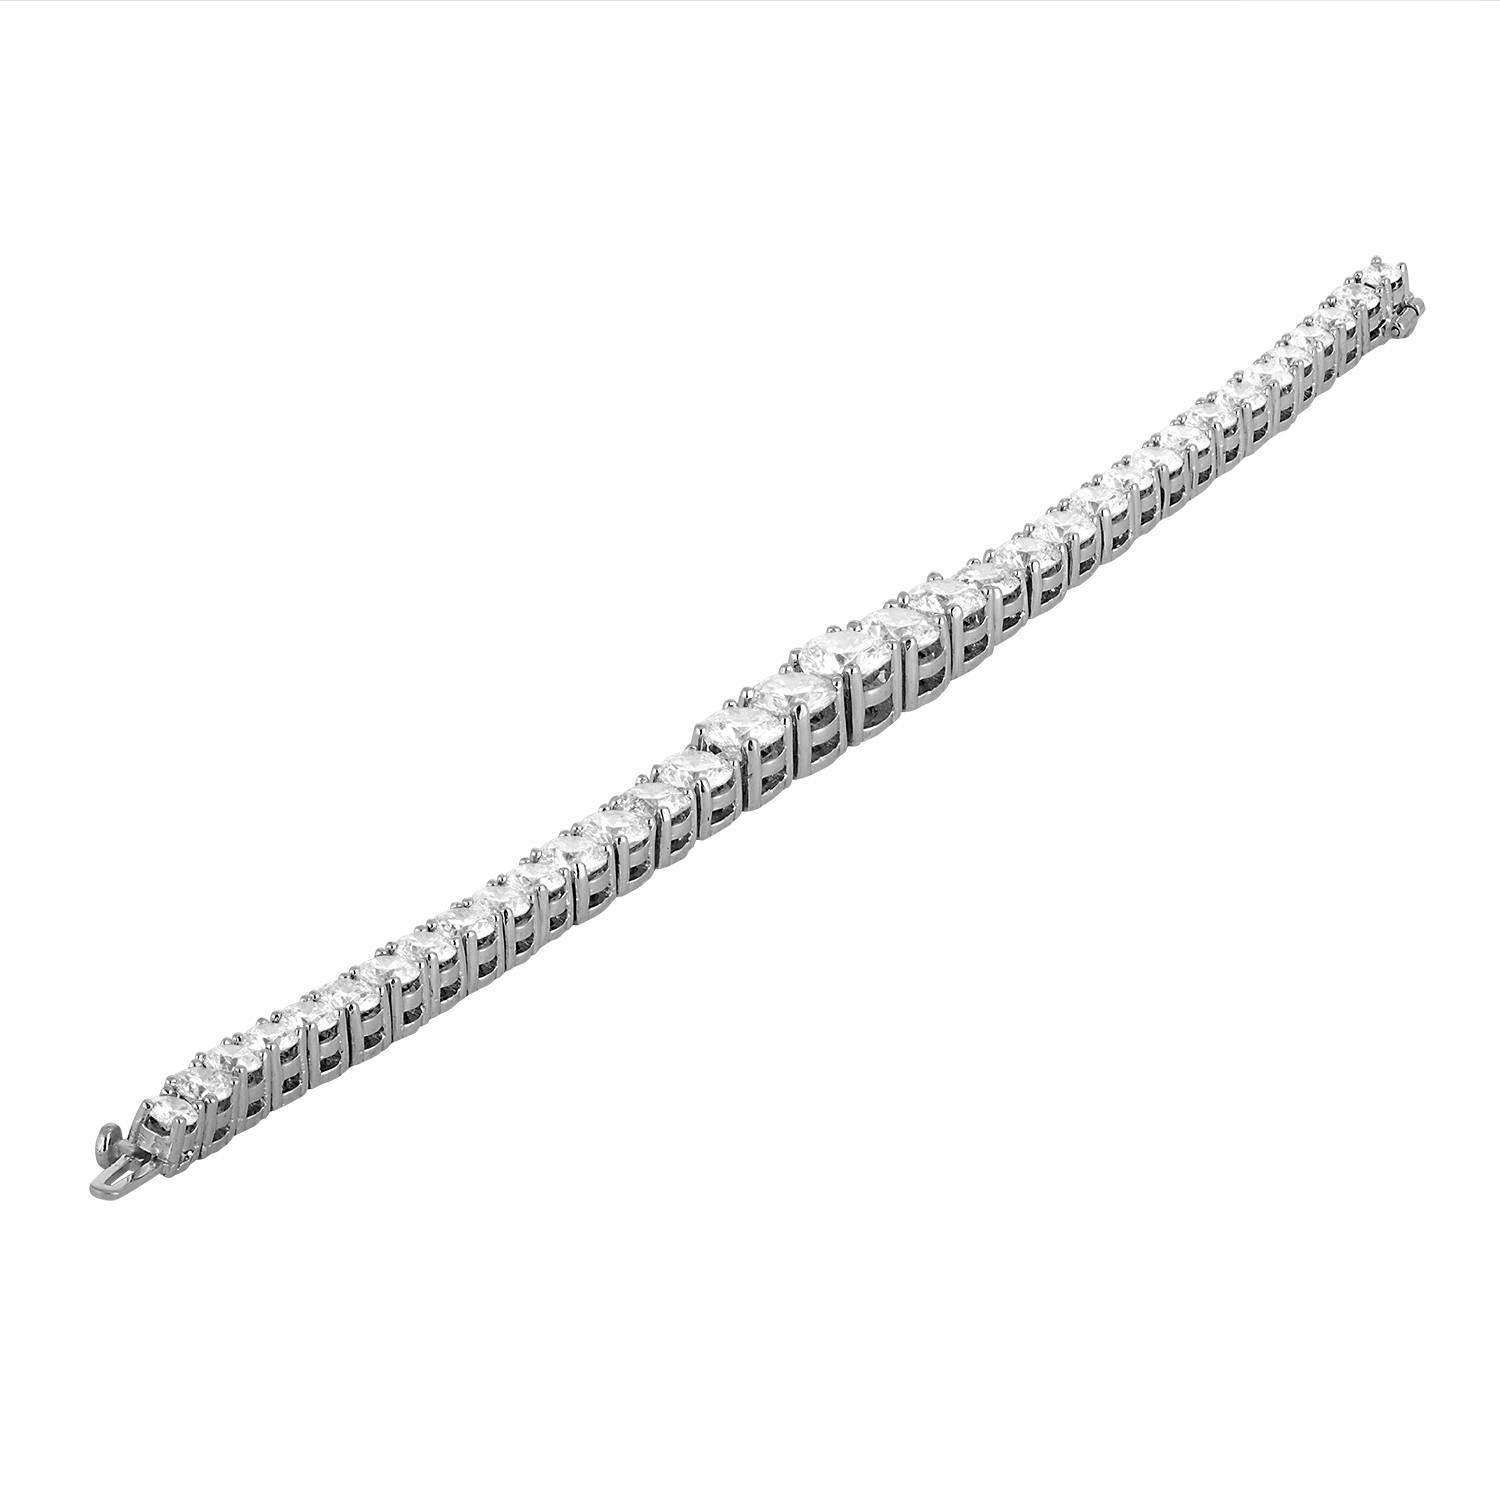 A Very unique and different looking Tennis Bracelet. It is not an average Tennis Bracelet. This Bracelet has 35 Brilliant White Diamonds, estimated to be H in color and VS - SI in clarity. The center stone is 1.32 Carat and the Diamond sizes are